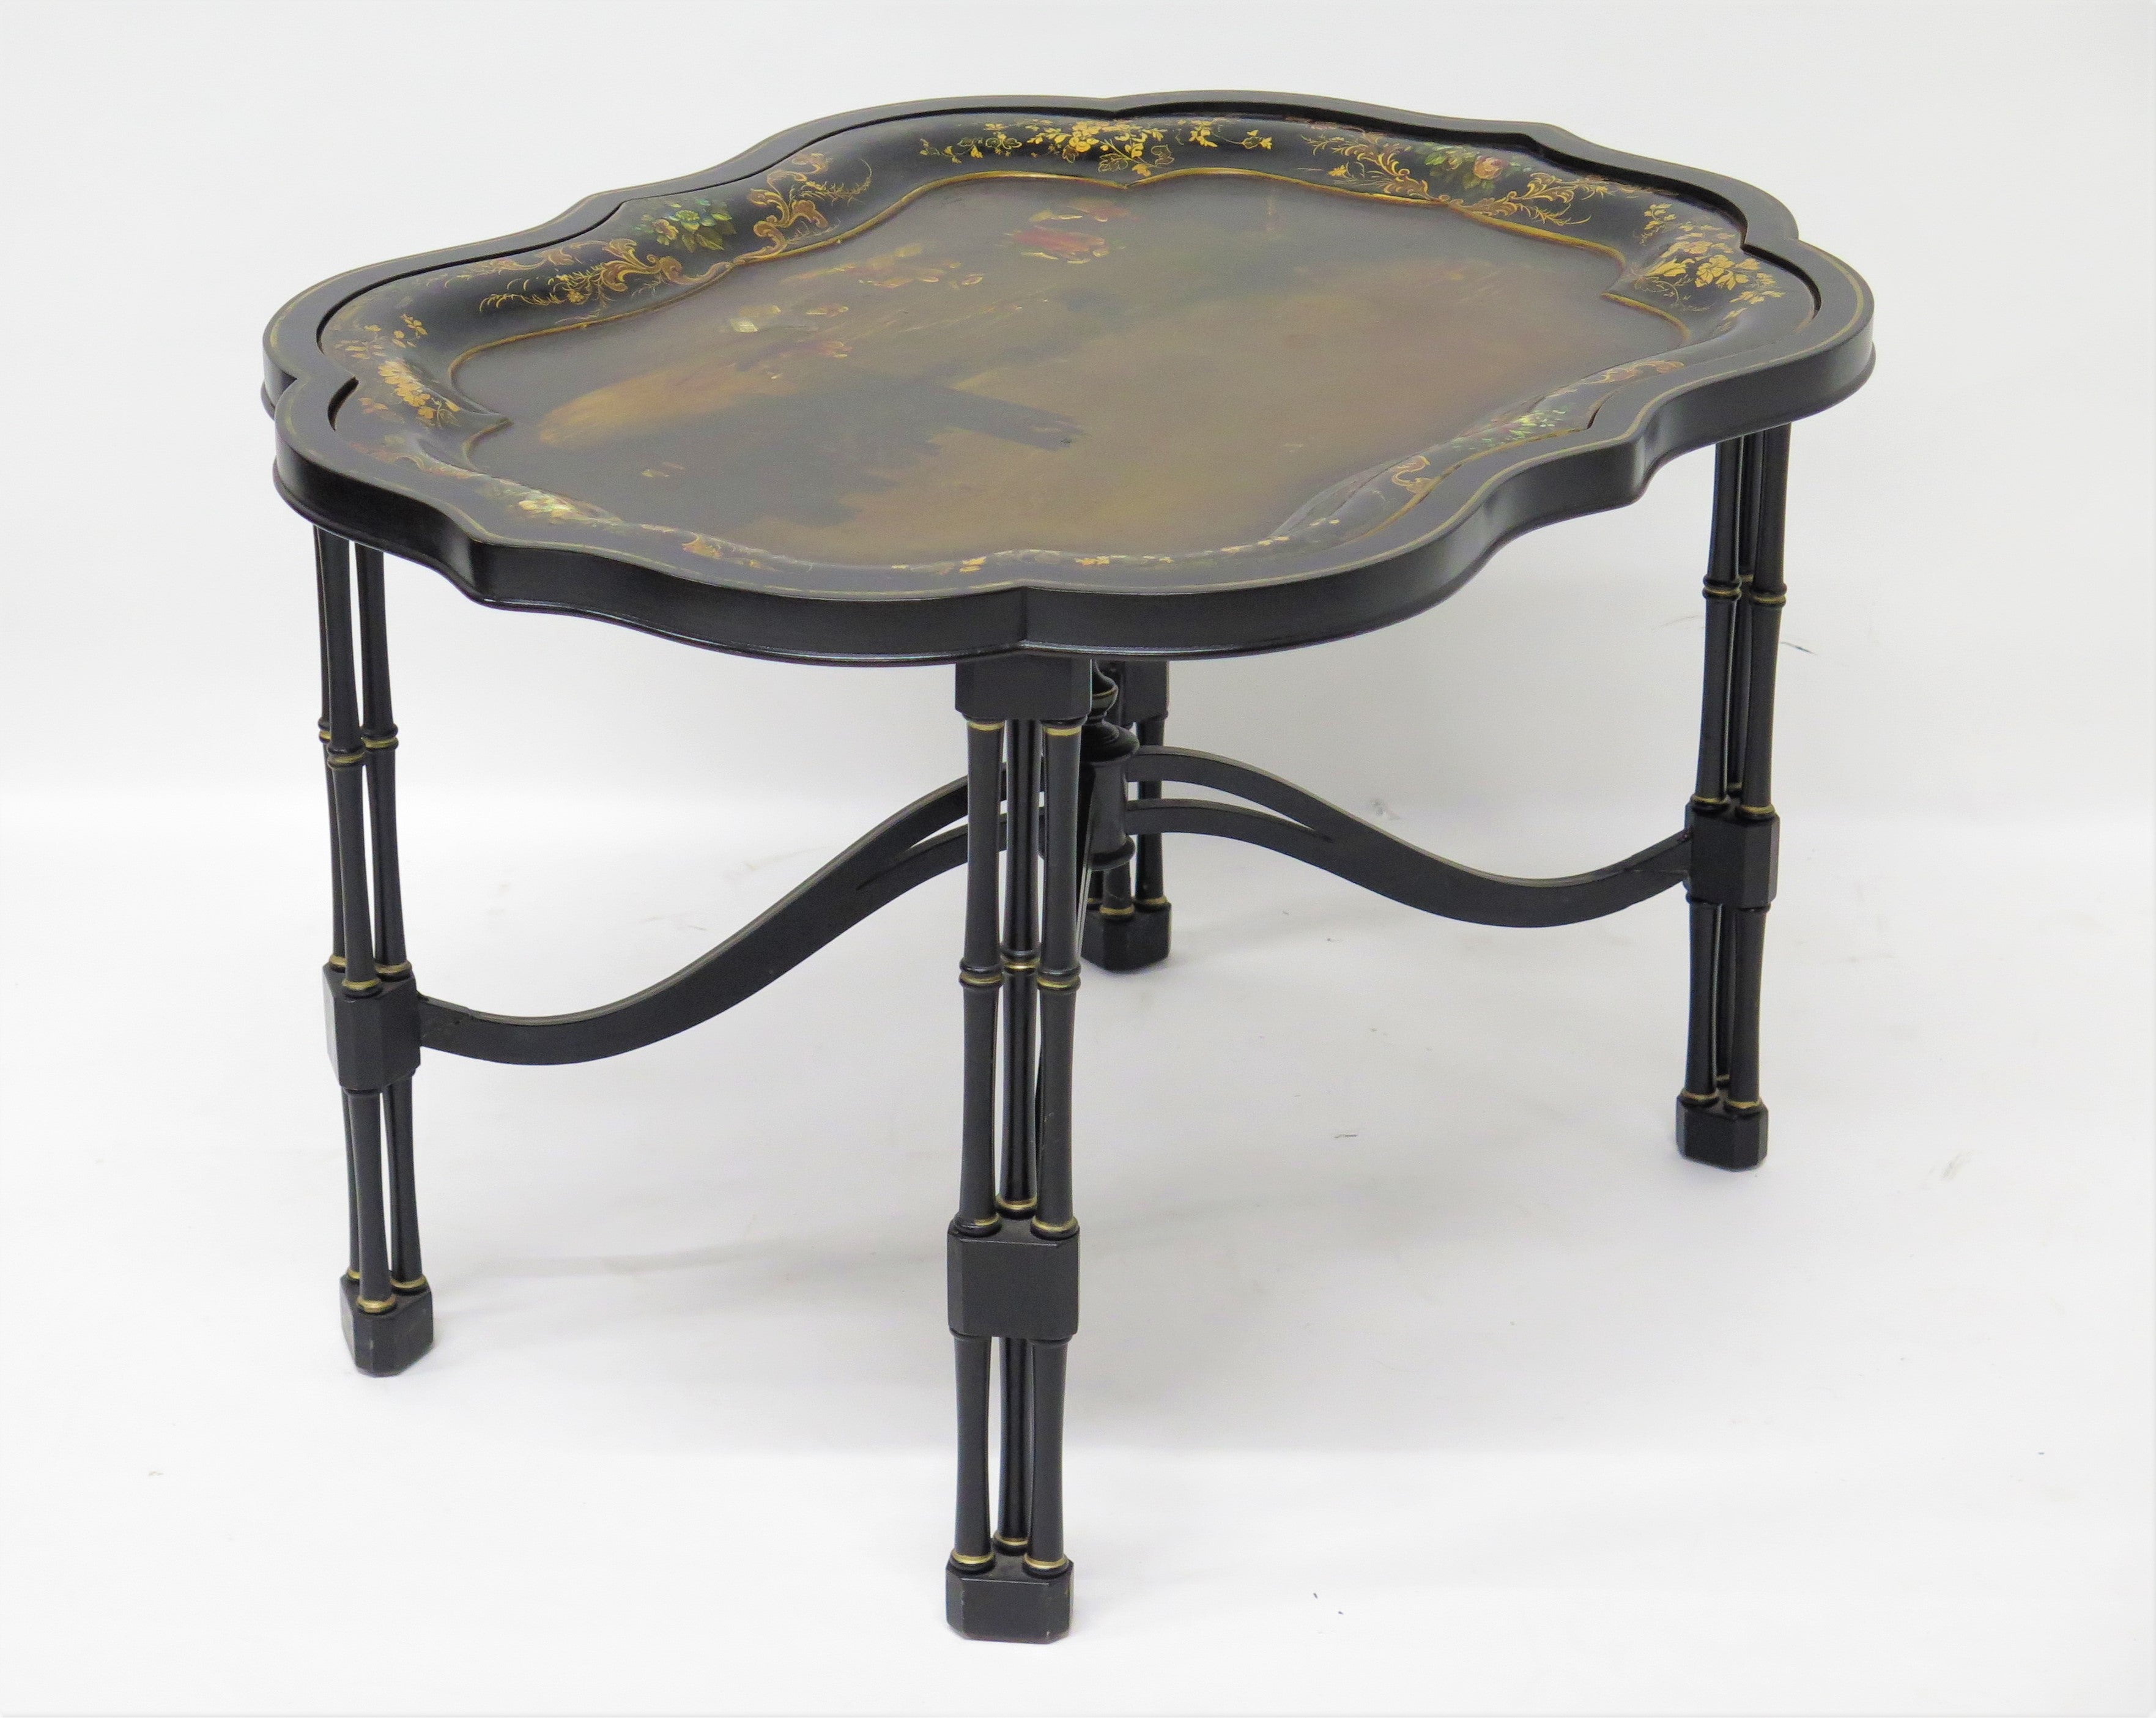 English Hand-Painted and Gilded Papier-mâché Tray on Custom Stand